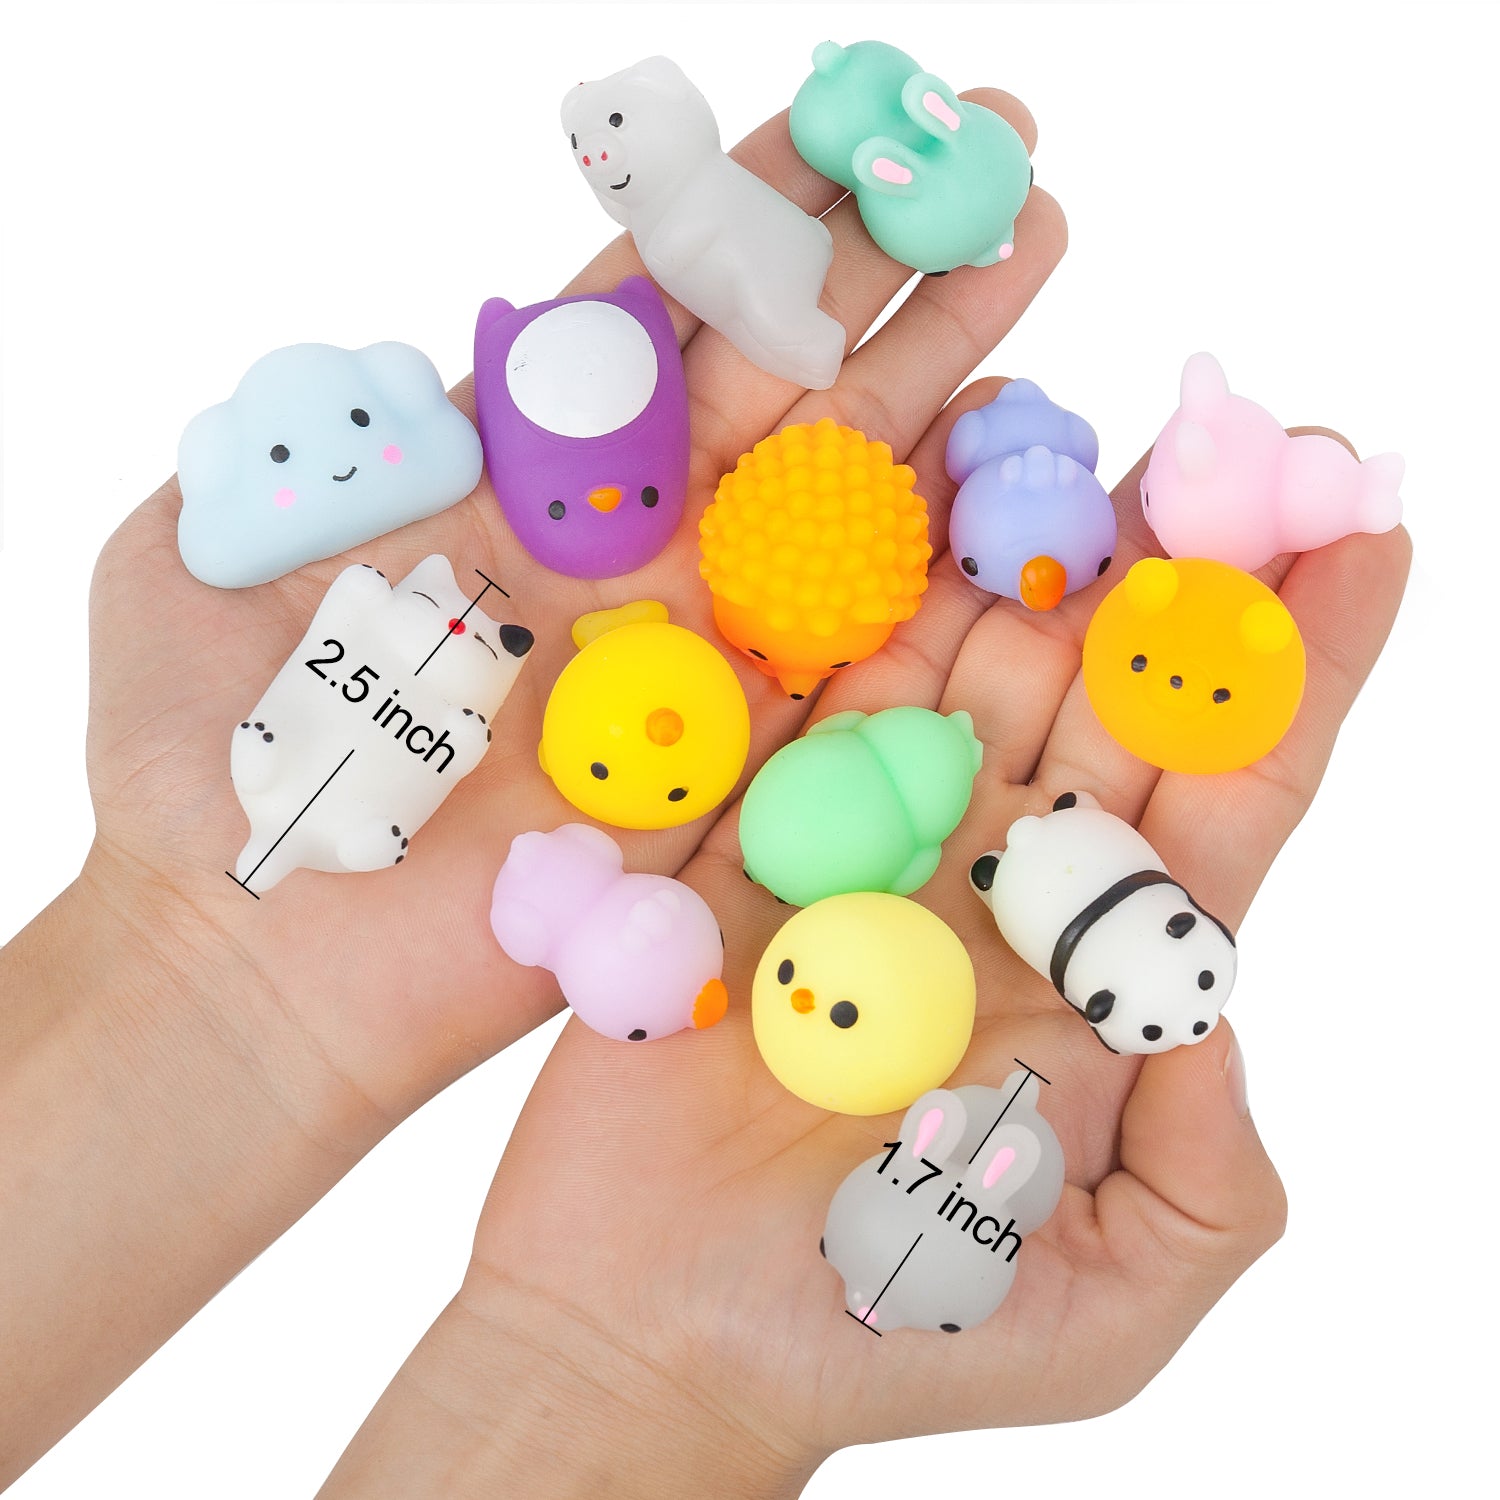 100 Pcs Kawaii Squishies, Mochi Squishy Toys for Kids Party Favors